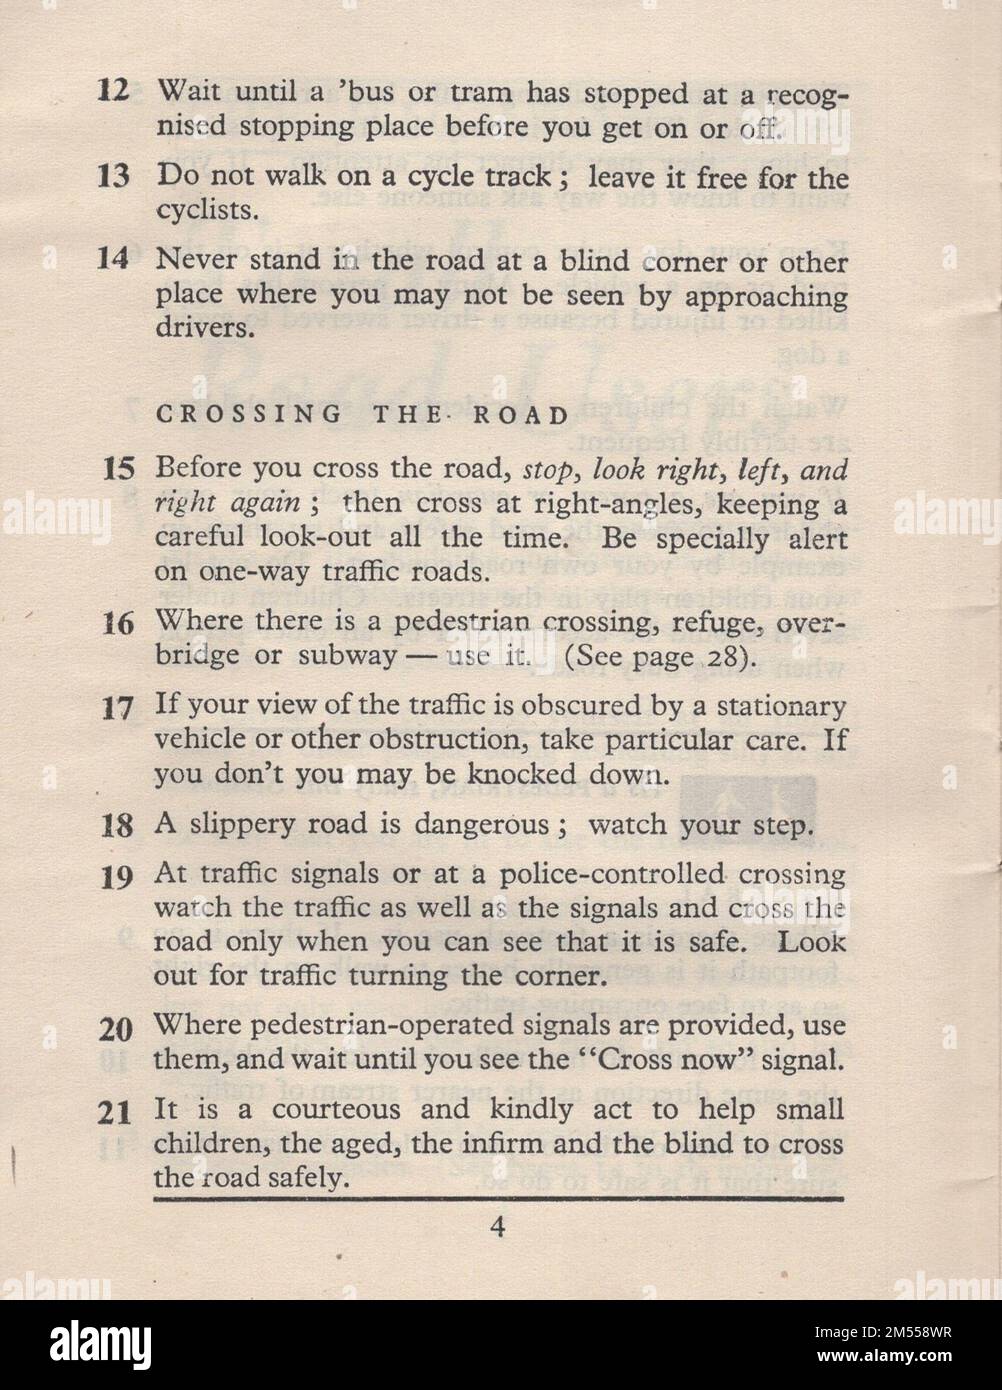 The highway code : Issued by the minister of transport with the authority of parlaiment for the guidance and safety of all road users with an appendix including diagrams of signal and signs. London : published by His Majesty's stationery office. One penny net. To be purchased direct from H.M. Stationery Office at following addresses : York House, Kingsway, London WC2 / 13a castle street Edinburgh 2 / 39-41 King street Manchester 2 / 1st Andrews Crescent Cardiff / 80 Chichester street , Belfast / or through any bookseller. crossing the road Stock Photo